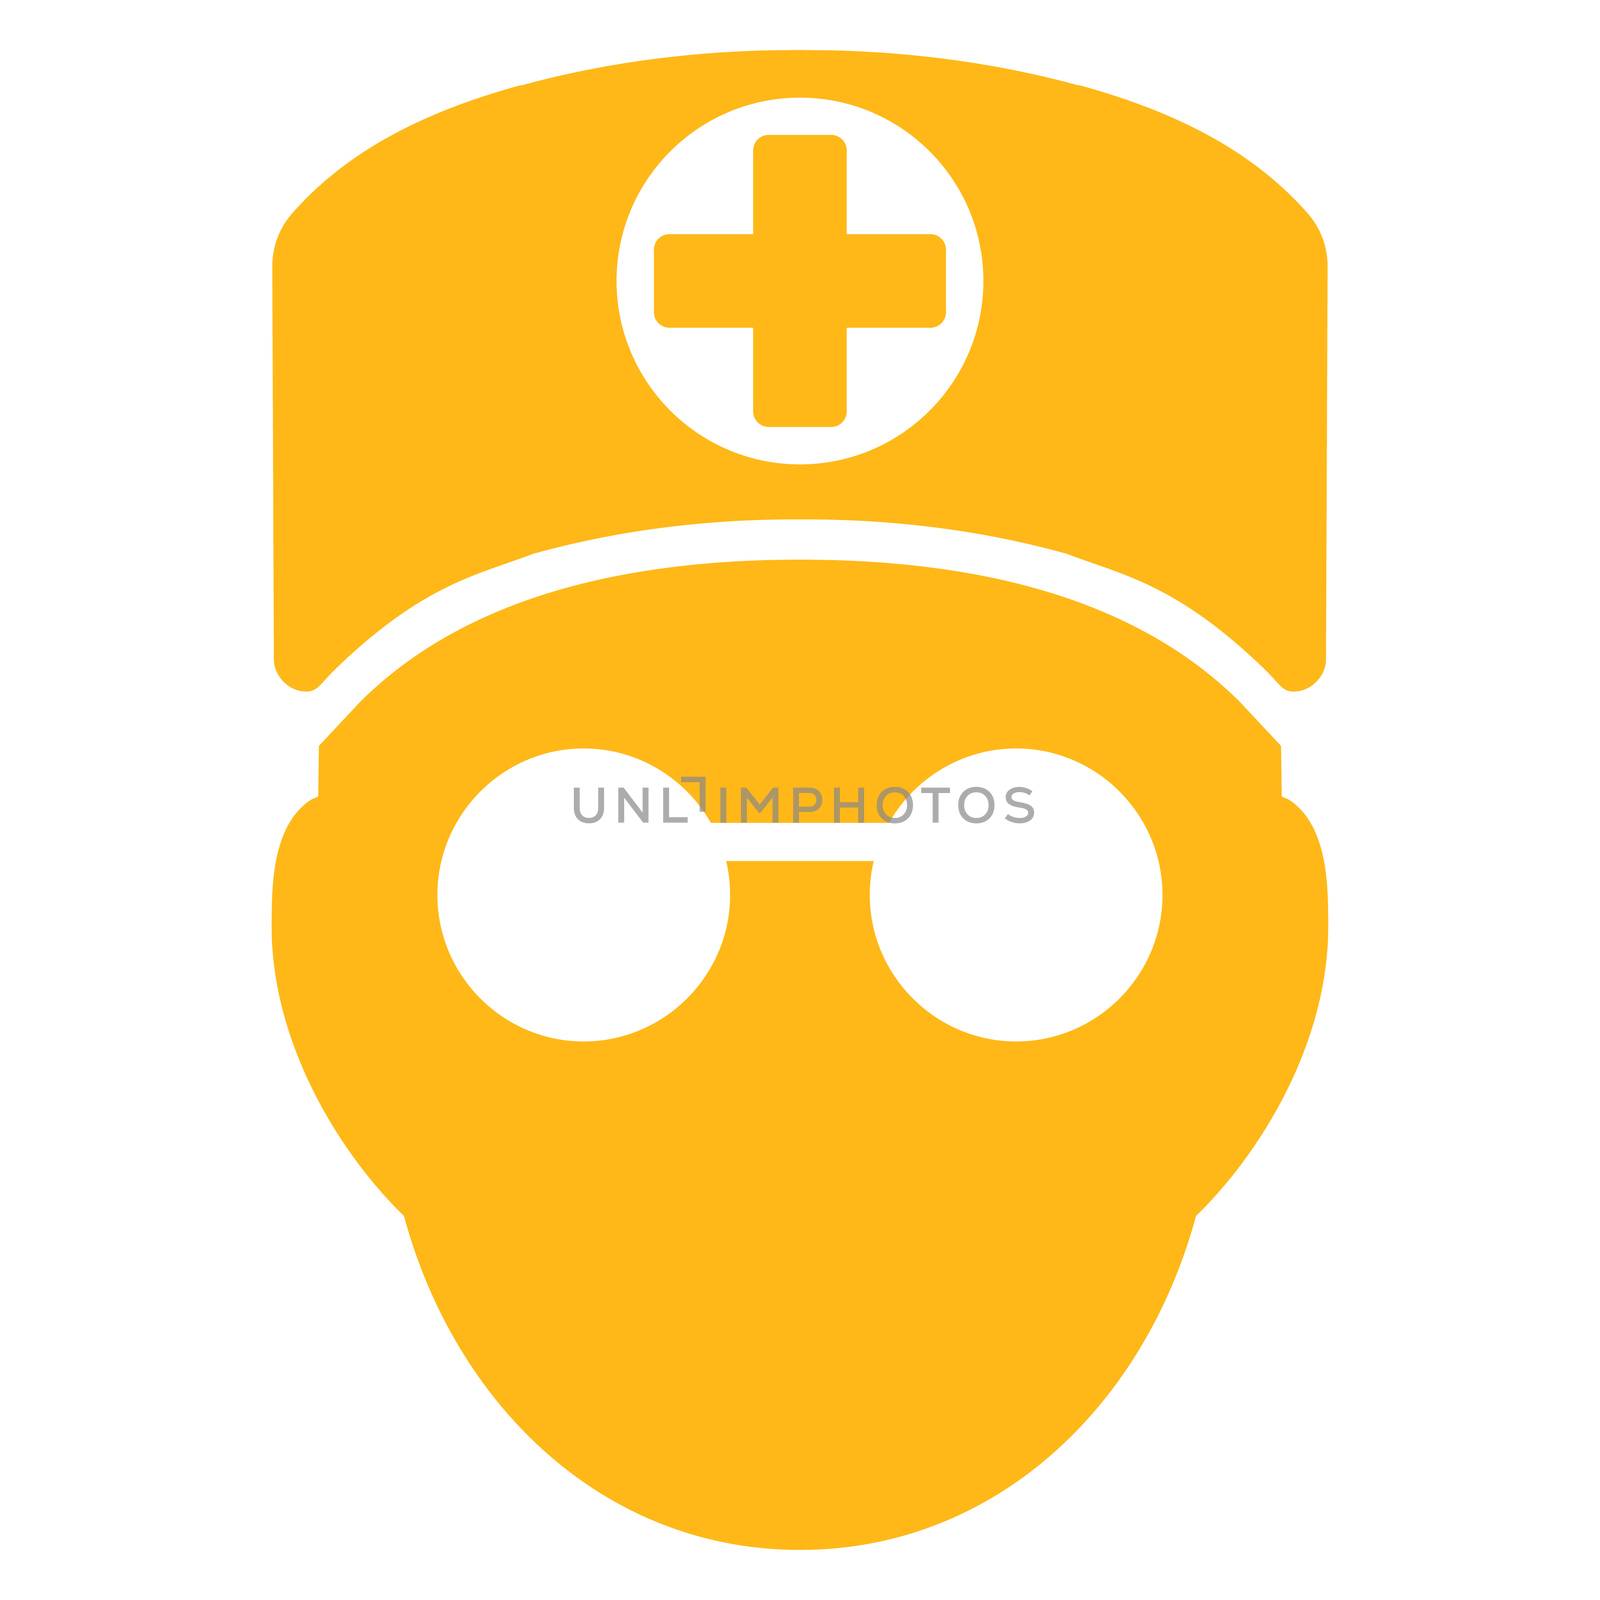 Doctor Head raster icon. Style is flat symbol, yellow color, rounded angles, white background.